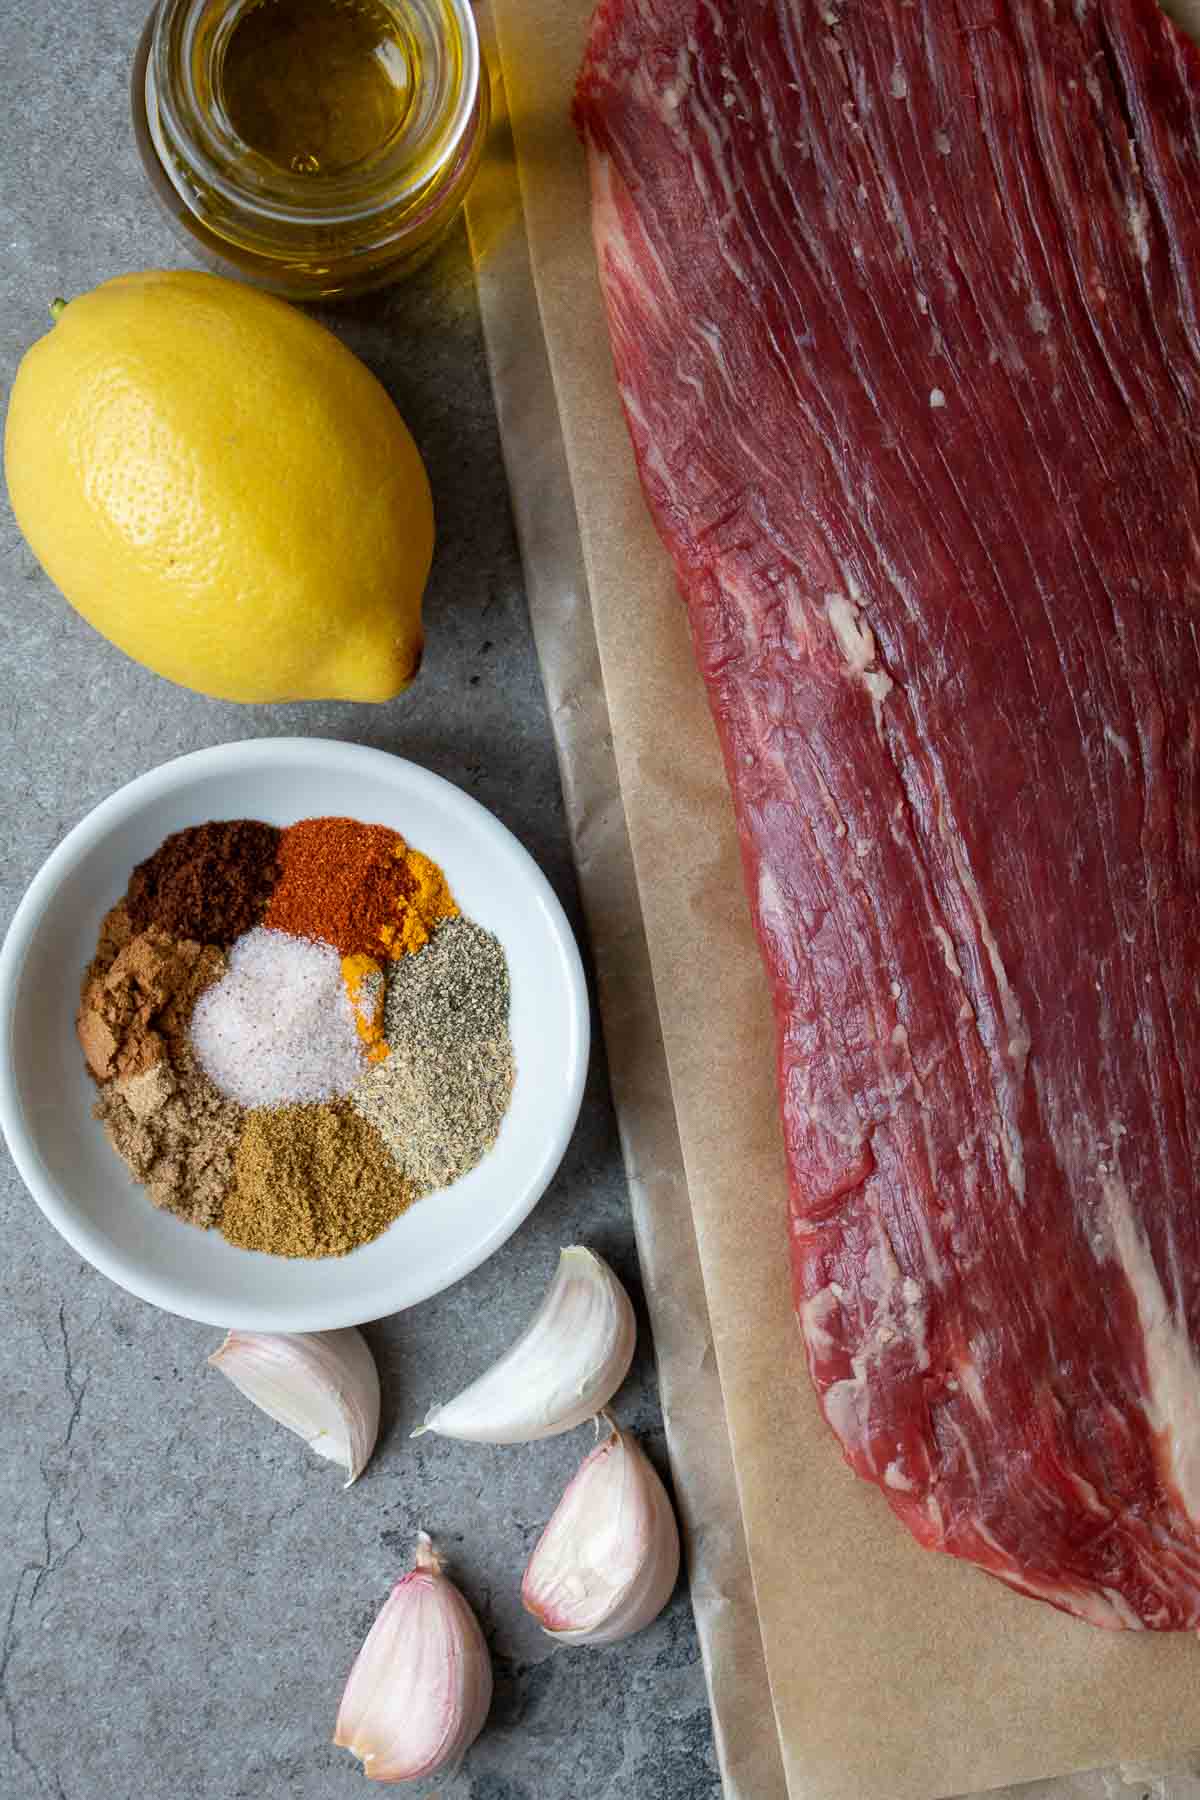 Ingredients for beef shawarma; flank steak, olive oil, lemon juice, garlic, and shawarma spices.